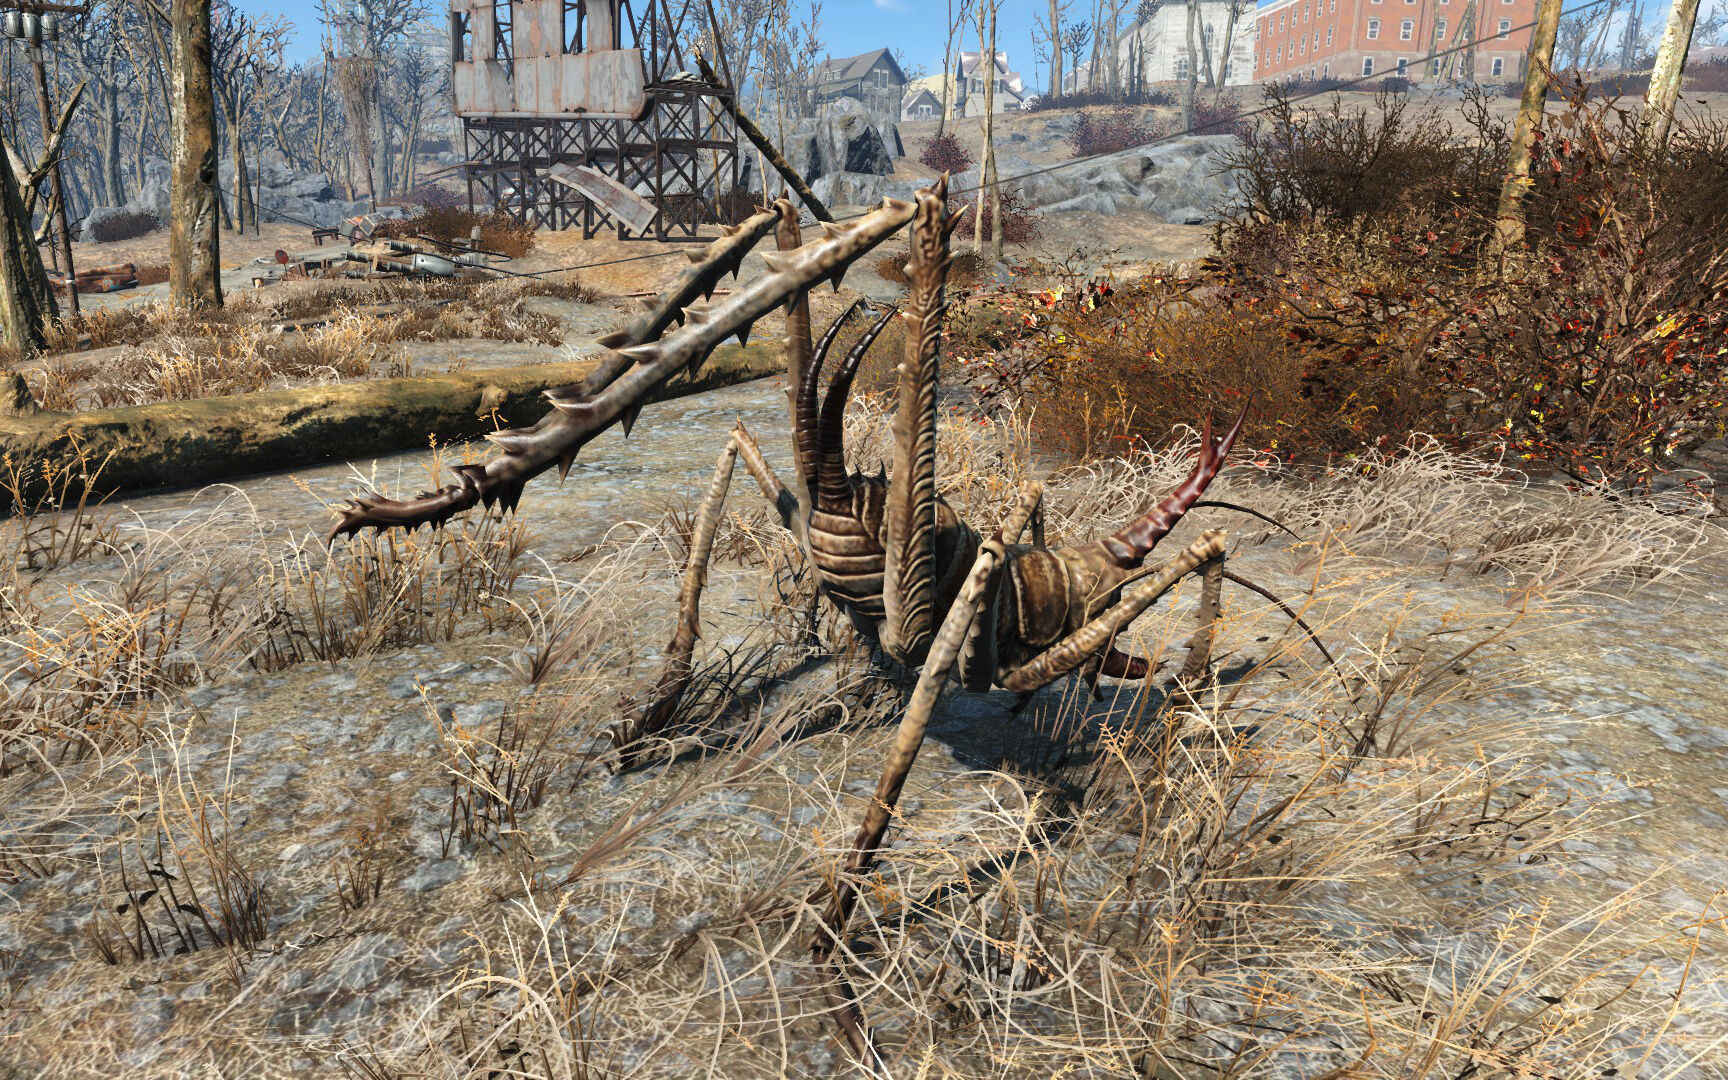 Fallout 4: Nuka-World Fallout: New Vegas Insect Fallout 3 Cave crickets,  insect, animals, fallout Wiki png